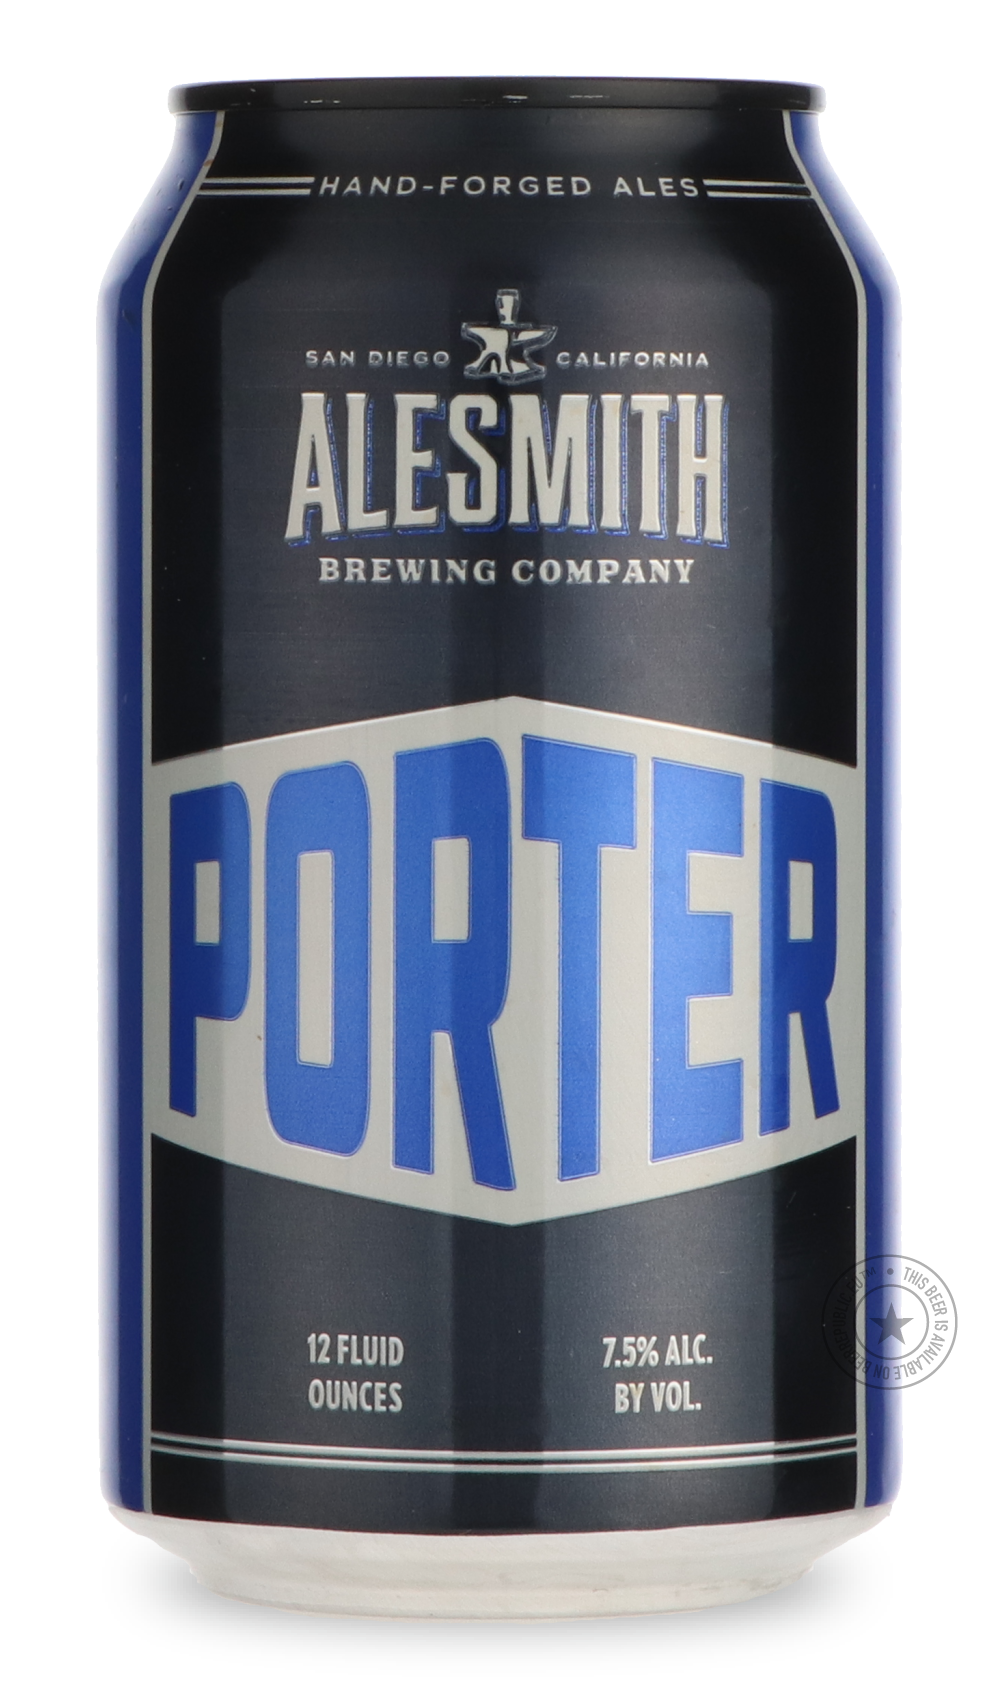 -AleSmith- AleSmith Porter-Stout & Porter- Only @ Beer Republic - The best online beer store for American & Canadian craft beer - Buy beer online from the USA and Canada - Bier online kopen - Amerikaans bier kopen - Craft beer store - Craft beer kopen - Amerikanisch bier kaufen - Bier online kaufen - Acheter biere online - IPA - Stout - Porter - New England IPA - Hazy IPA - Imperial Stout - Barrel Aged - Barrel Aged Imperial Stout - Brown - Dark beer - Blond - Blonde - Pilsner - Lager - Wheat - Weizen - Amb